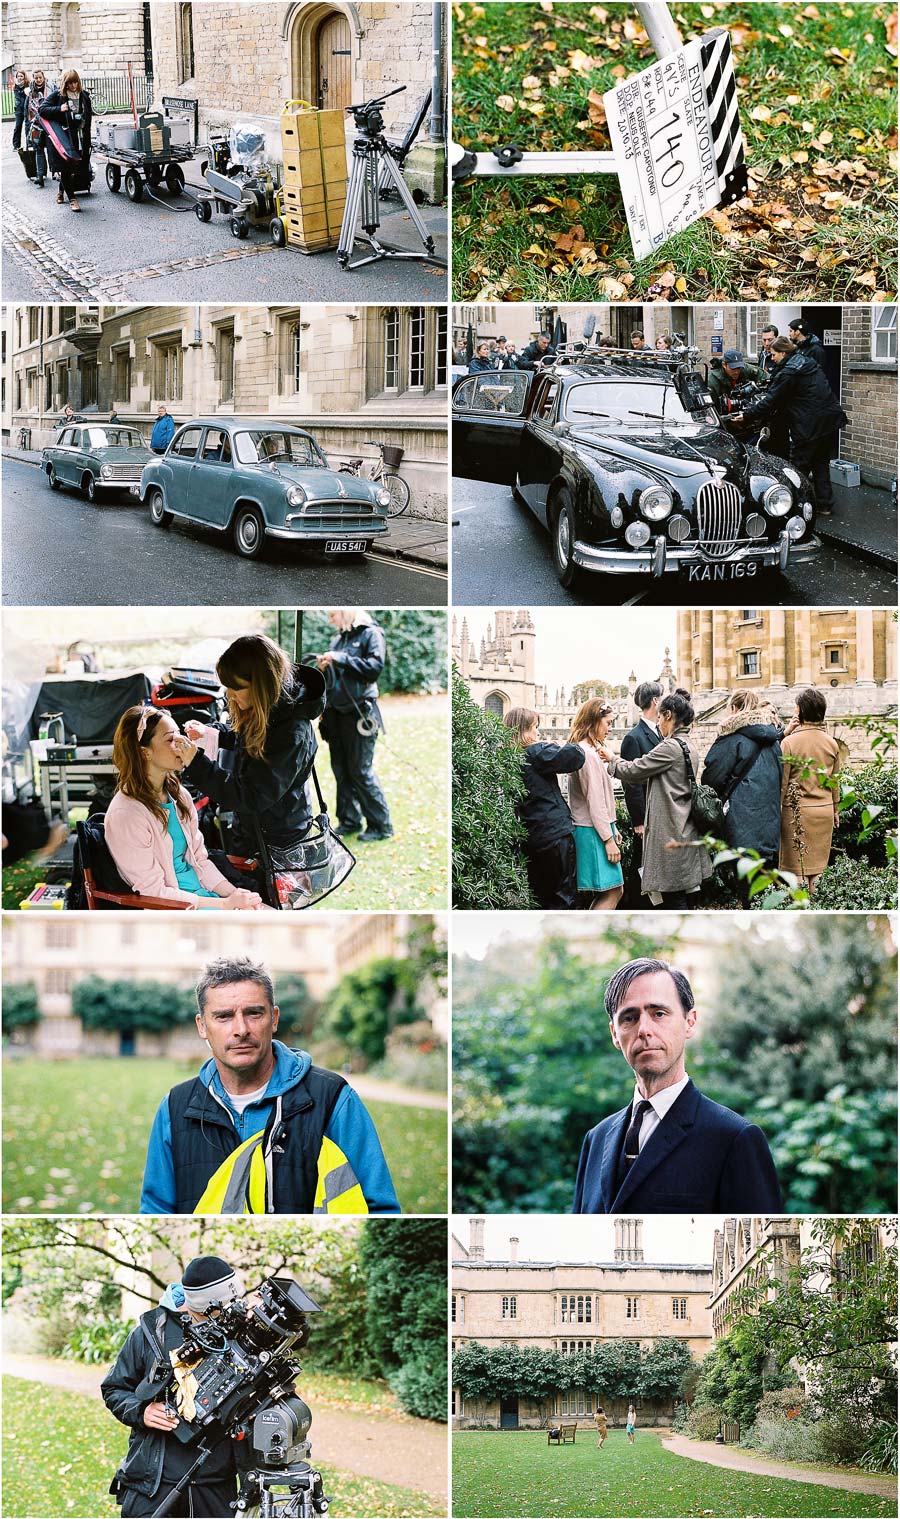 behind the scenes of Endeavour series 2 filming in oxford